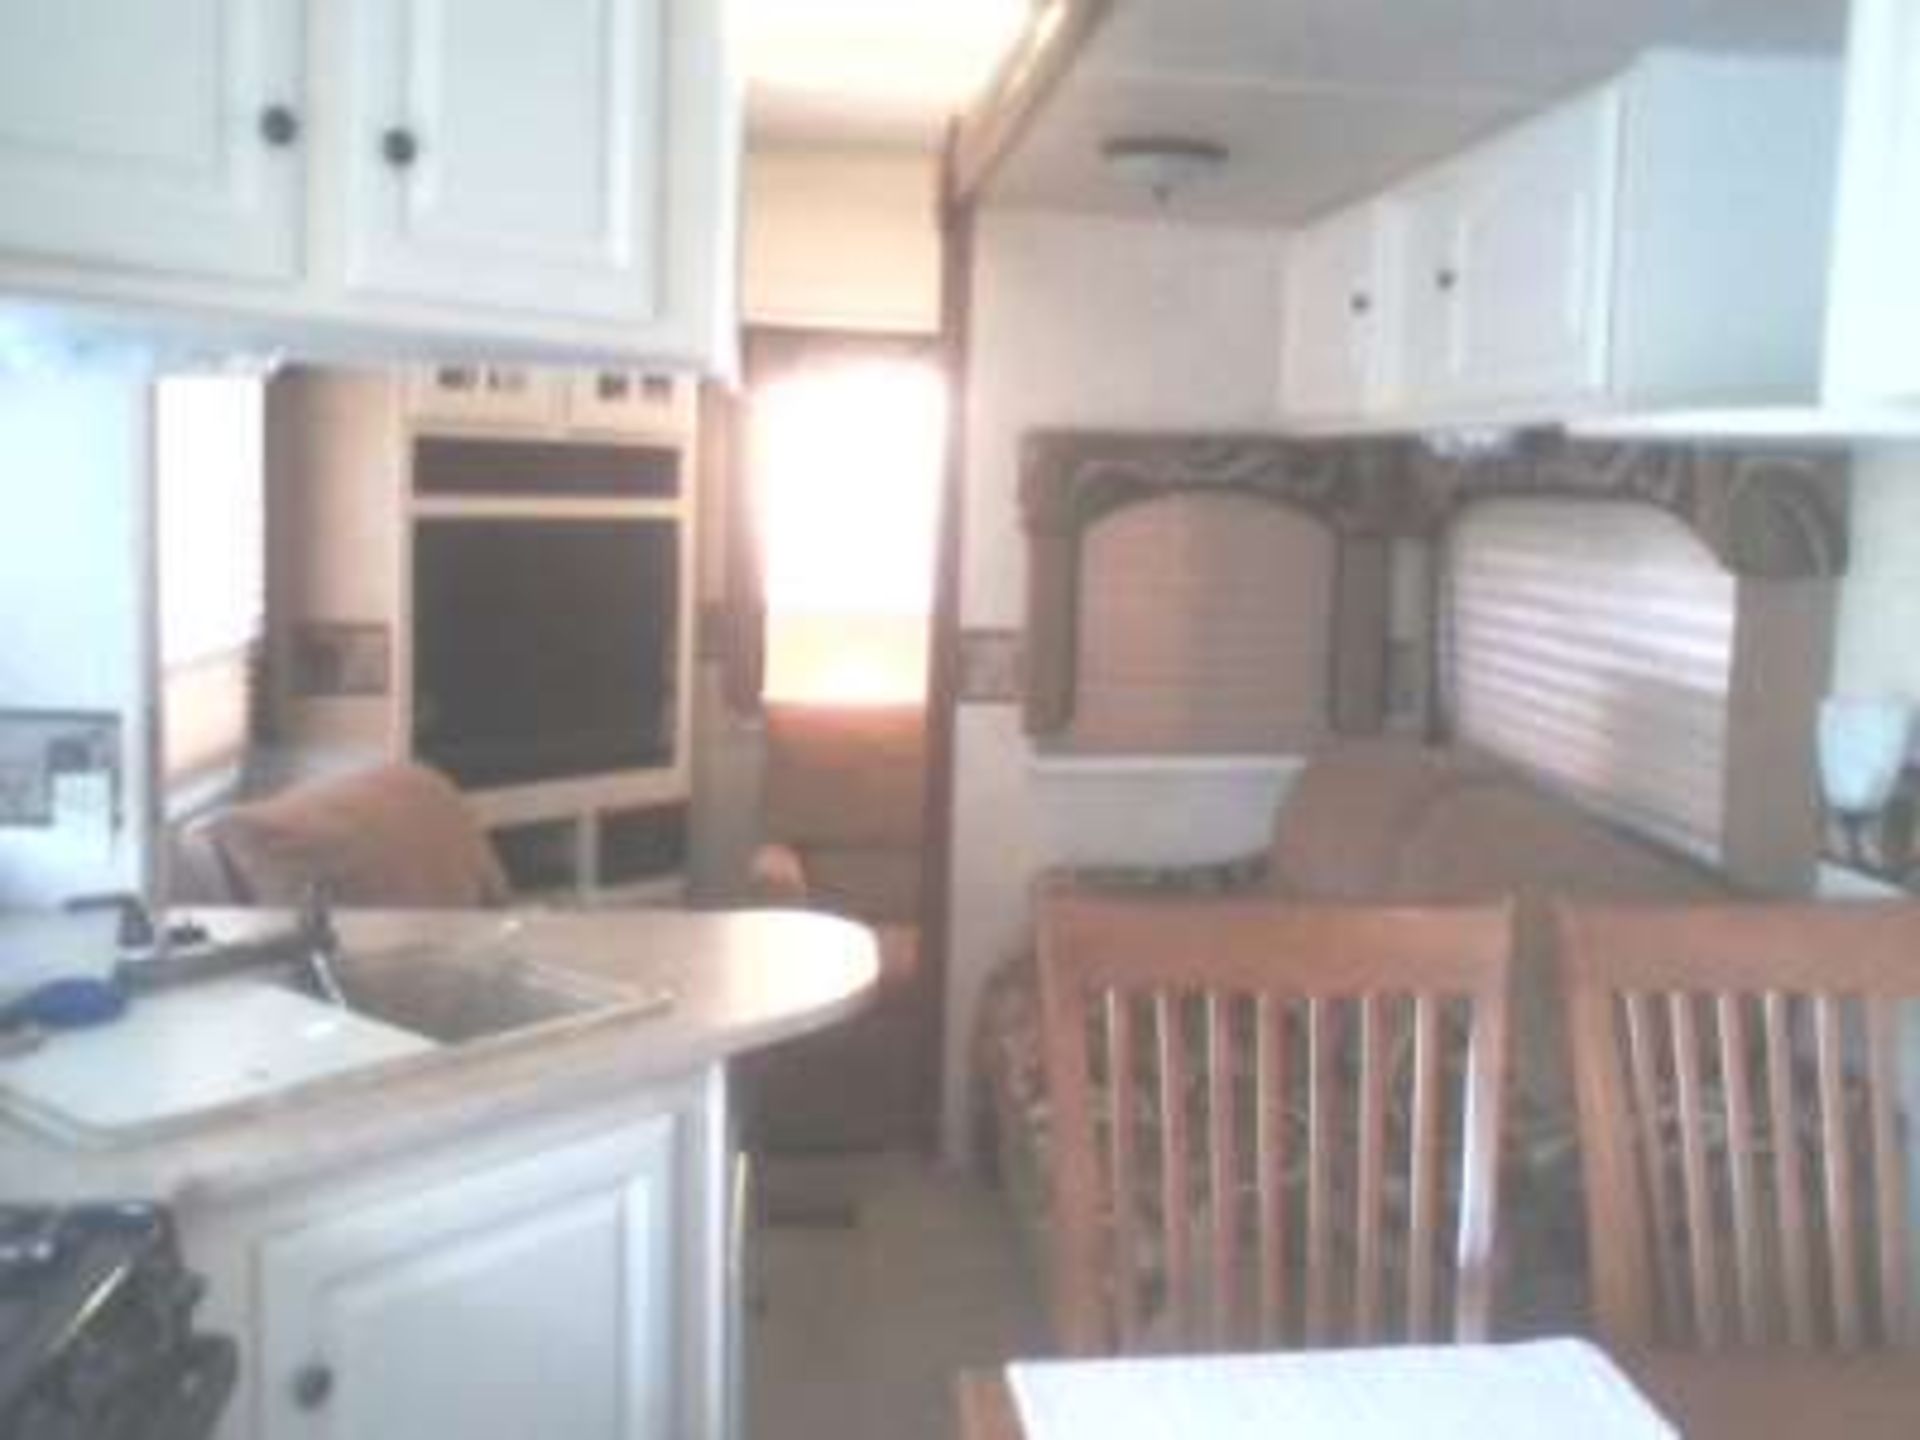 2009 30ft Outback 5TH Wheel Holiday Trailer, 2 slides, kitchen, dining table w/4 chairs, couch, 2 - Image 6 of 9